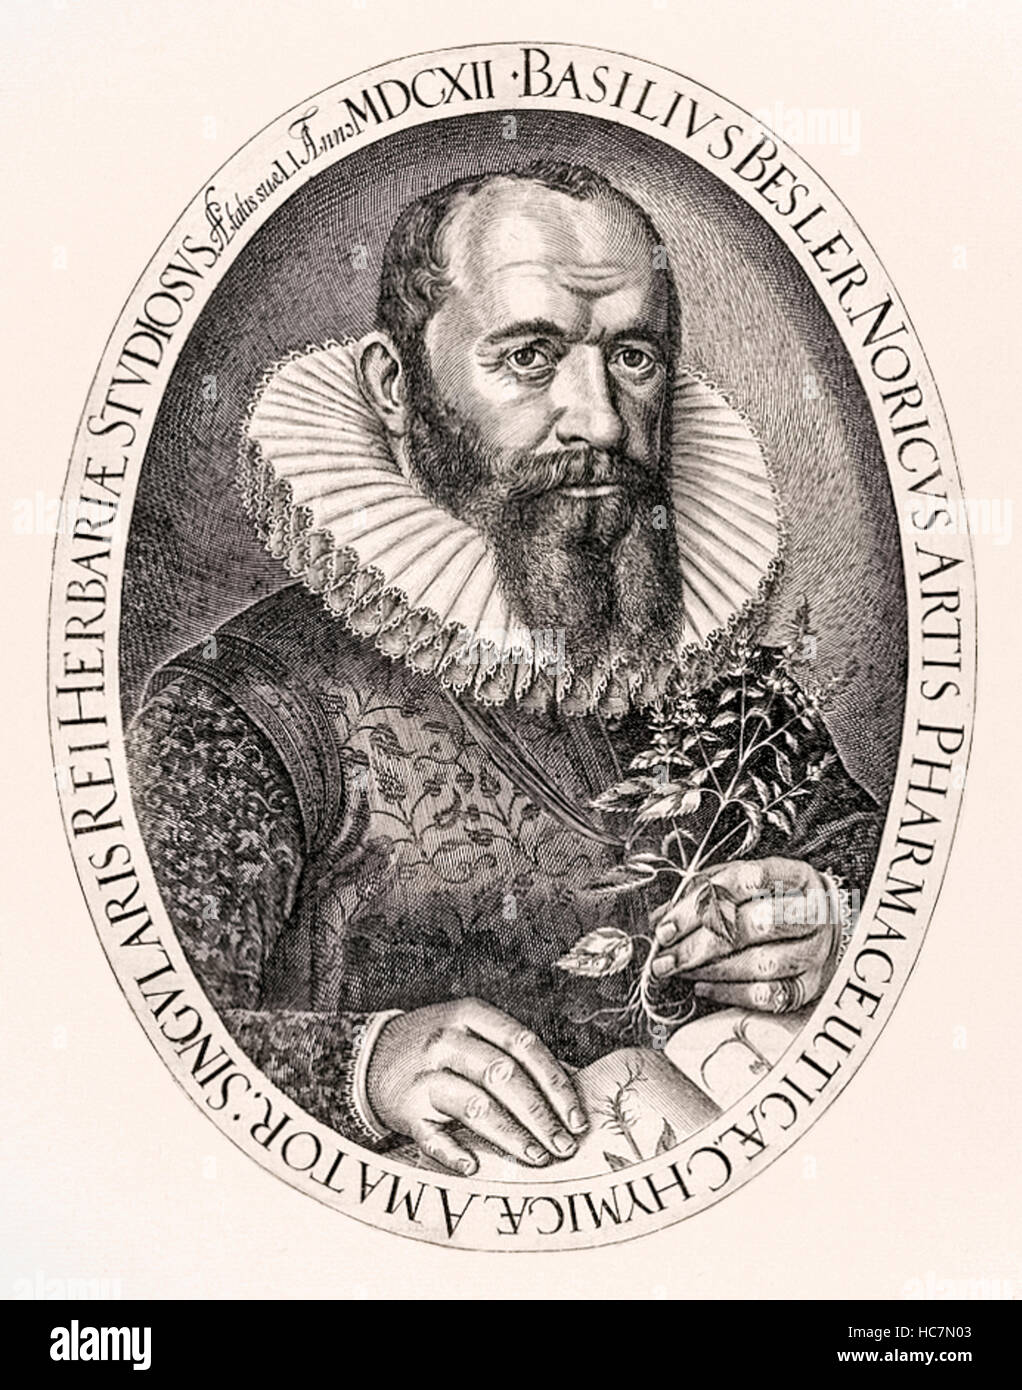 Basilius Besler (1561–1629) apothecary and botanist based in Nuremberg, Germany who compiled the Hortus Eystettensis published in 1613 featuring colour illustrations of plants found in the garden of Prince Bishop Johann Konrad von Gemmingen (1561-1612). See description for more information. Stock Photo